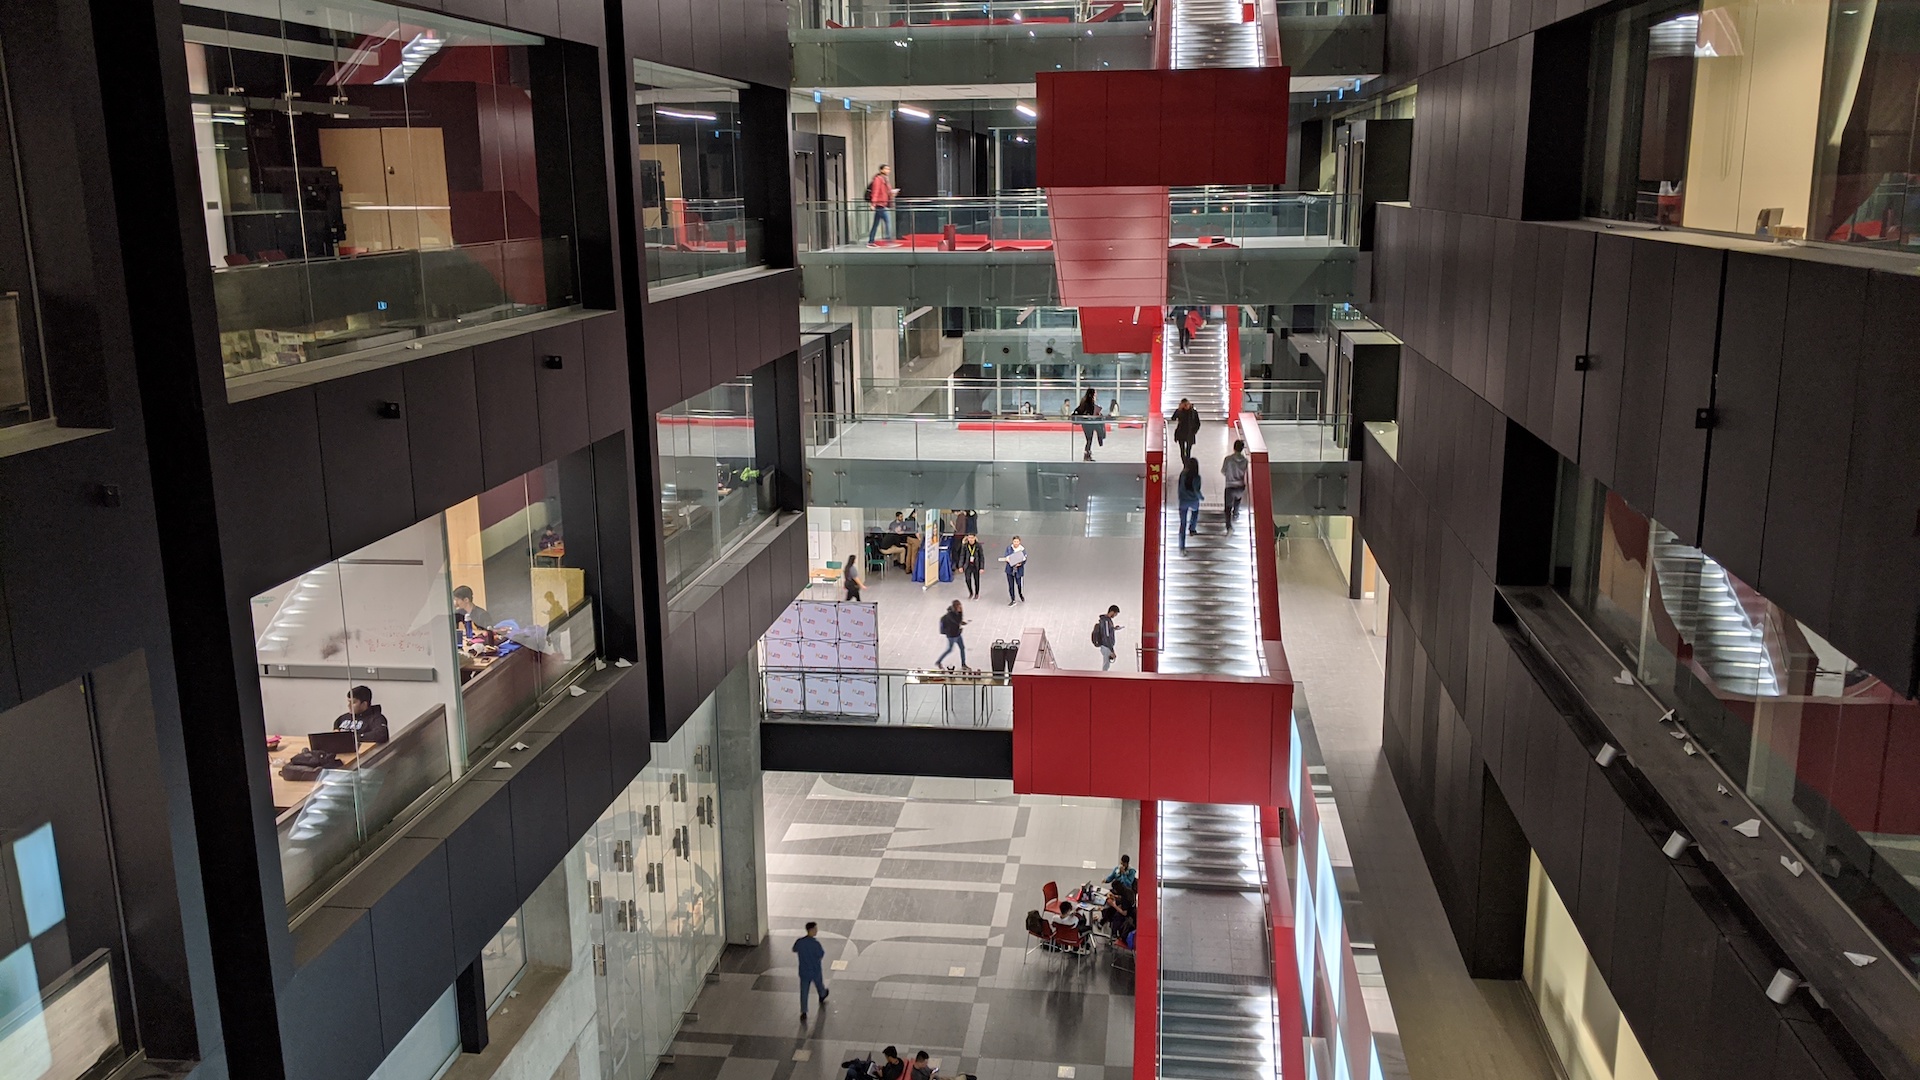 People walk up and down a red floating staircase at the University of Waterloo during StarterHacks in January 2020.